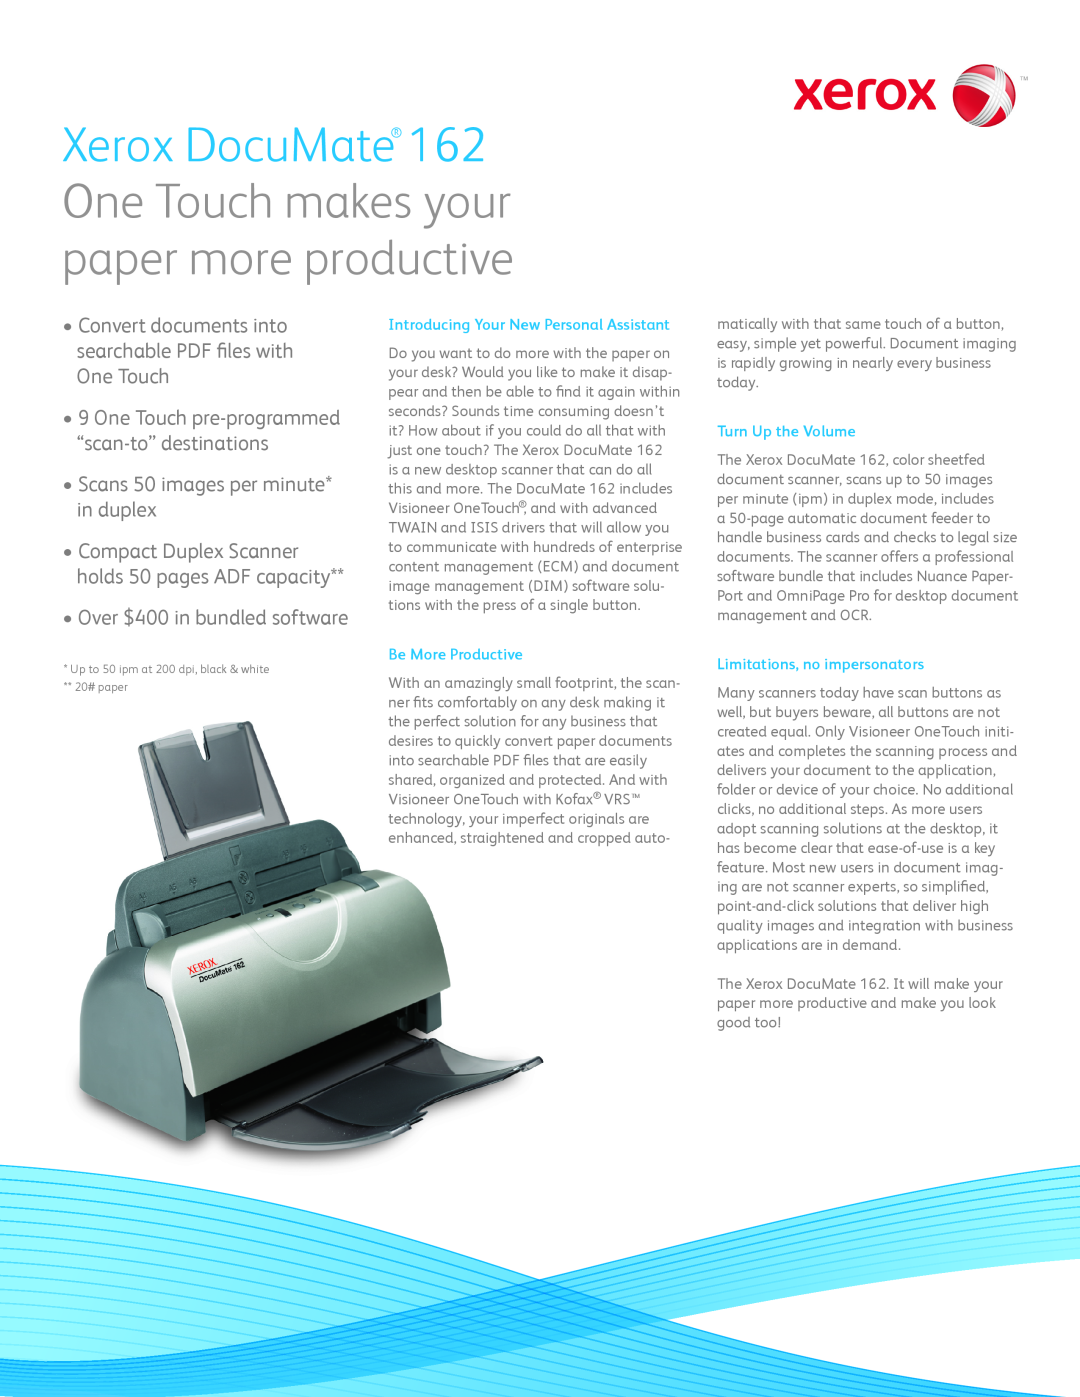 Xerox 162 manual Introducing Your New Personal Assistant, Be More Productive, Turn Up the Volume, One Touch 